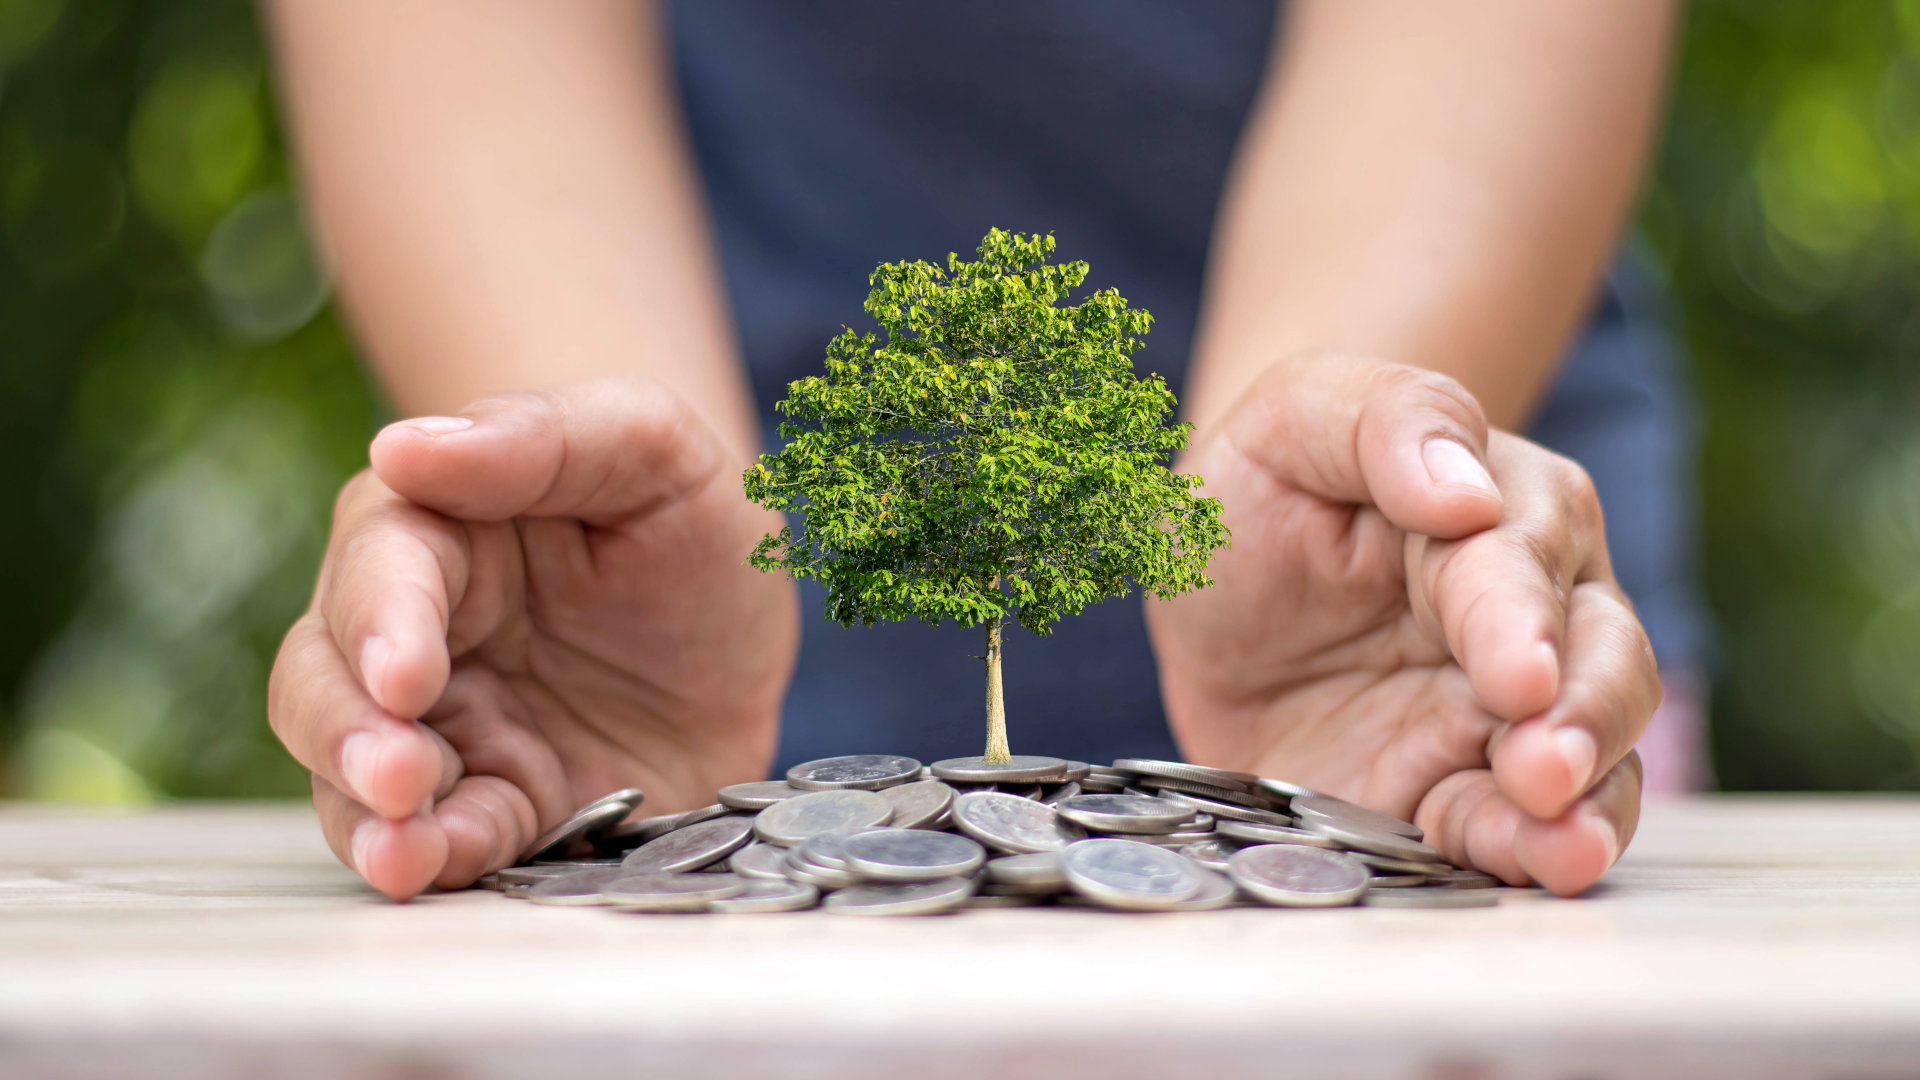 A tree planted on a pile of coins, with hands in the background.